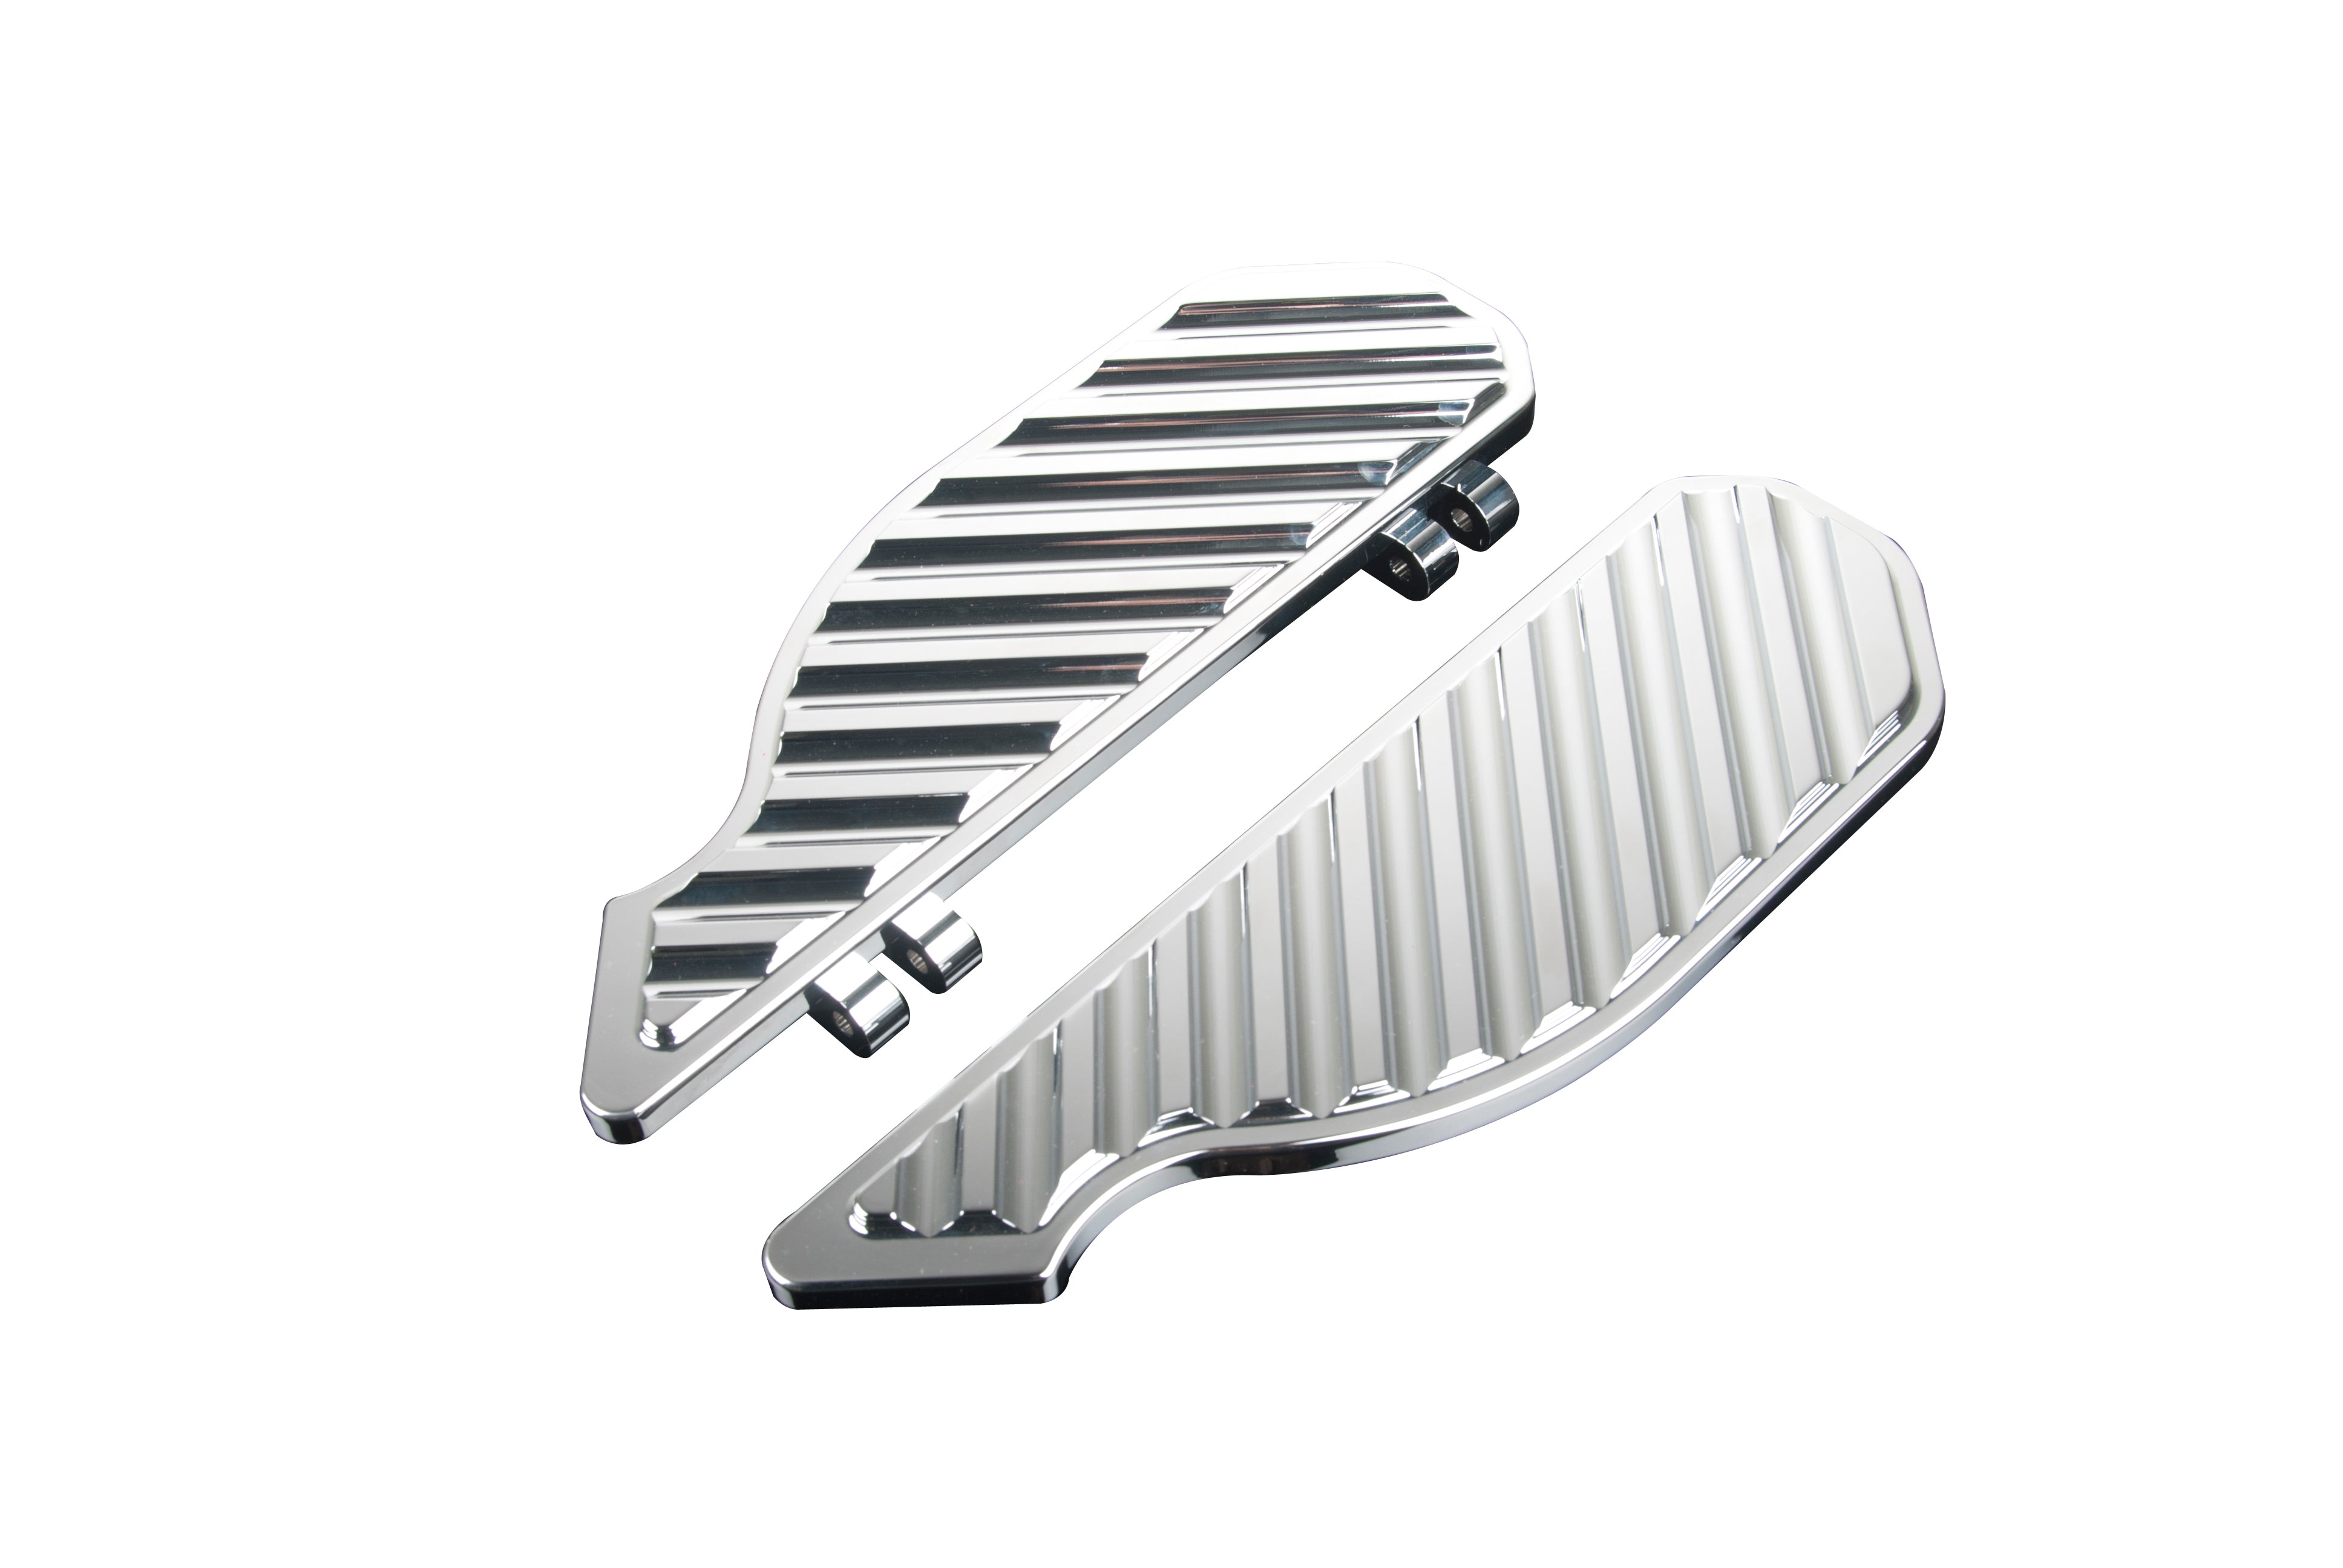 Tour Ease Chrome CNC Rider Floorboards Footboard Fit For Harley Touring 1986+Softail 86-17